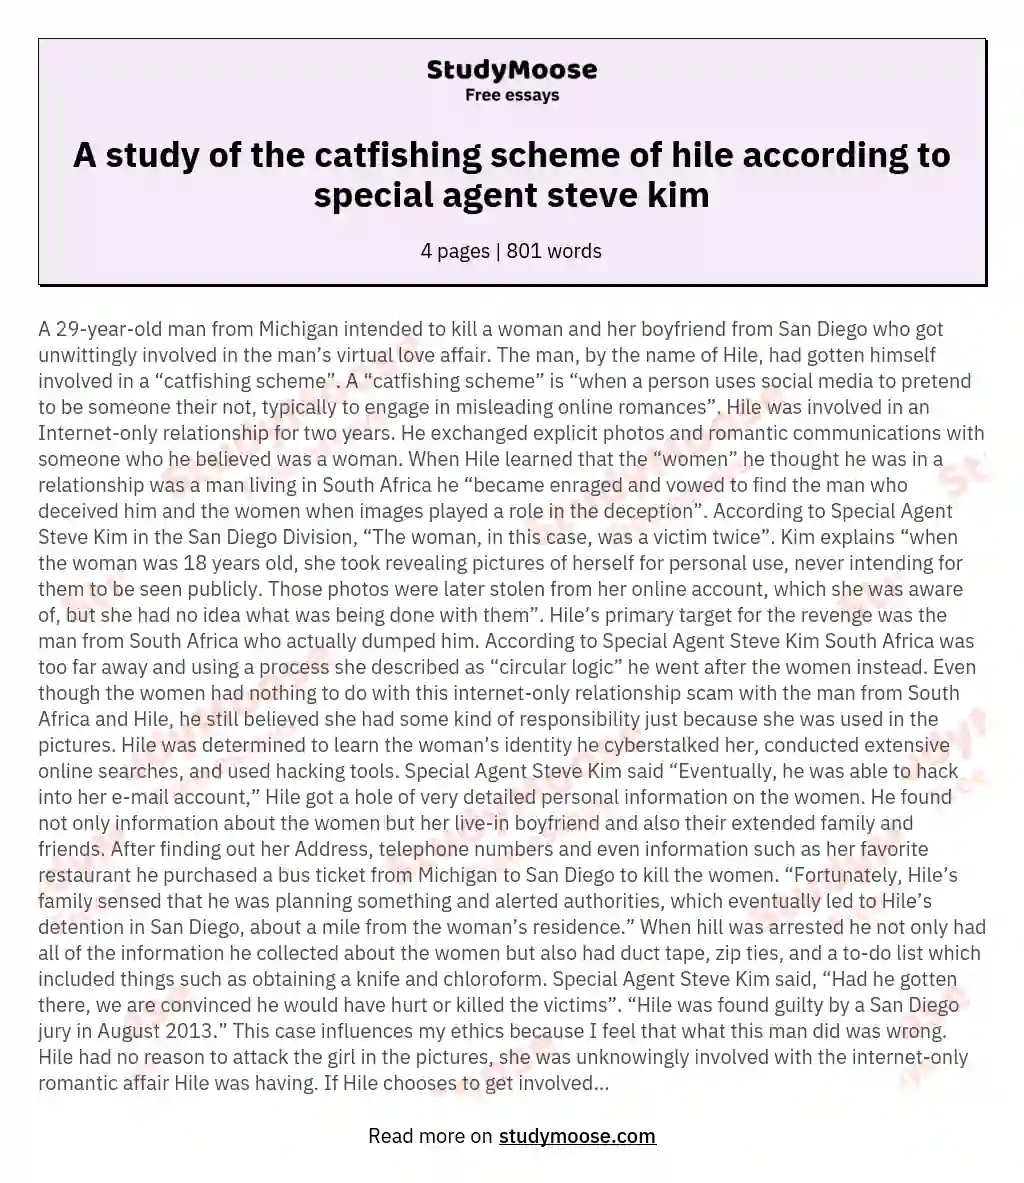 A study of the catfishing scheme of hile according to special agent steve kim